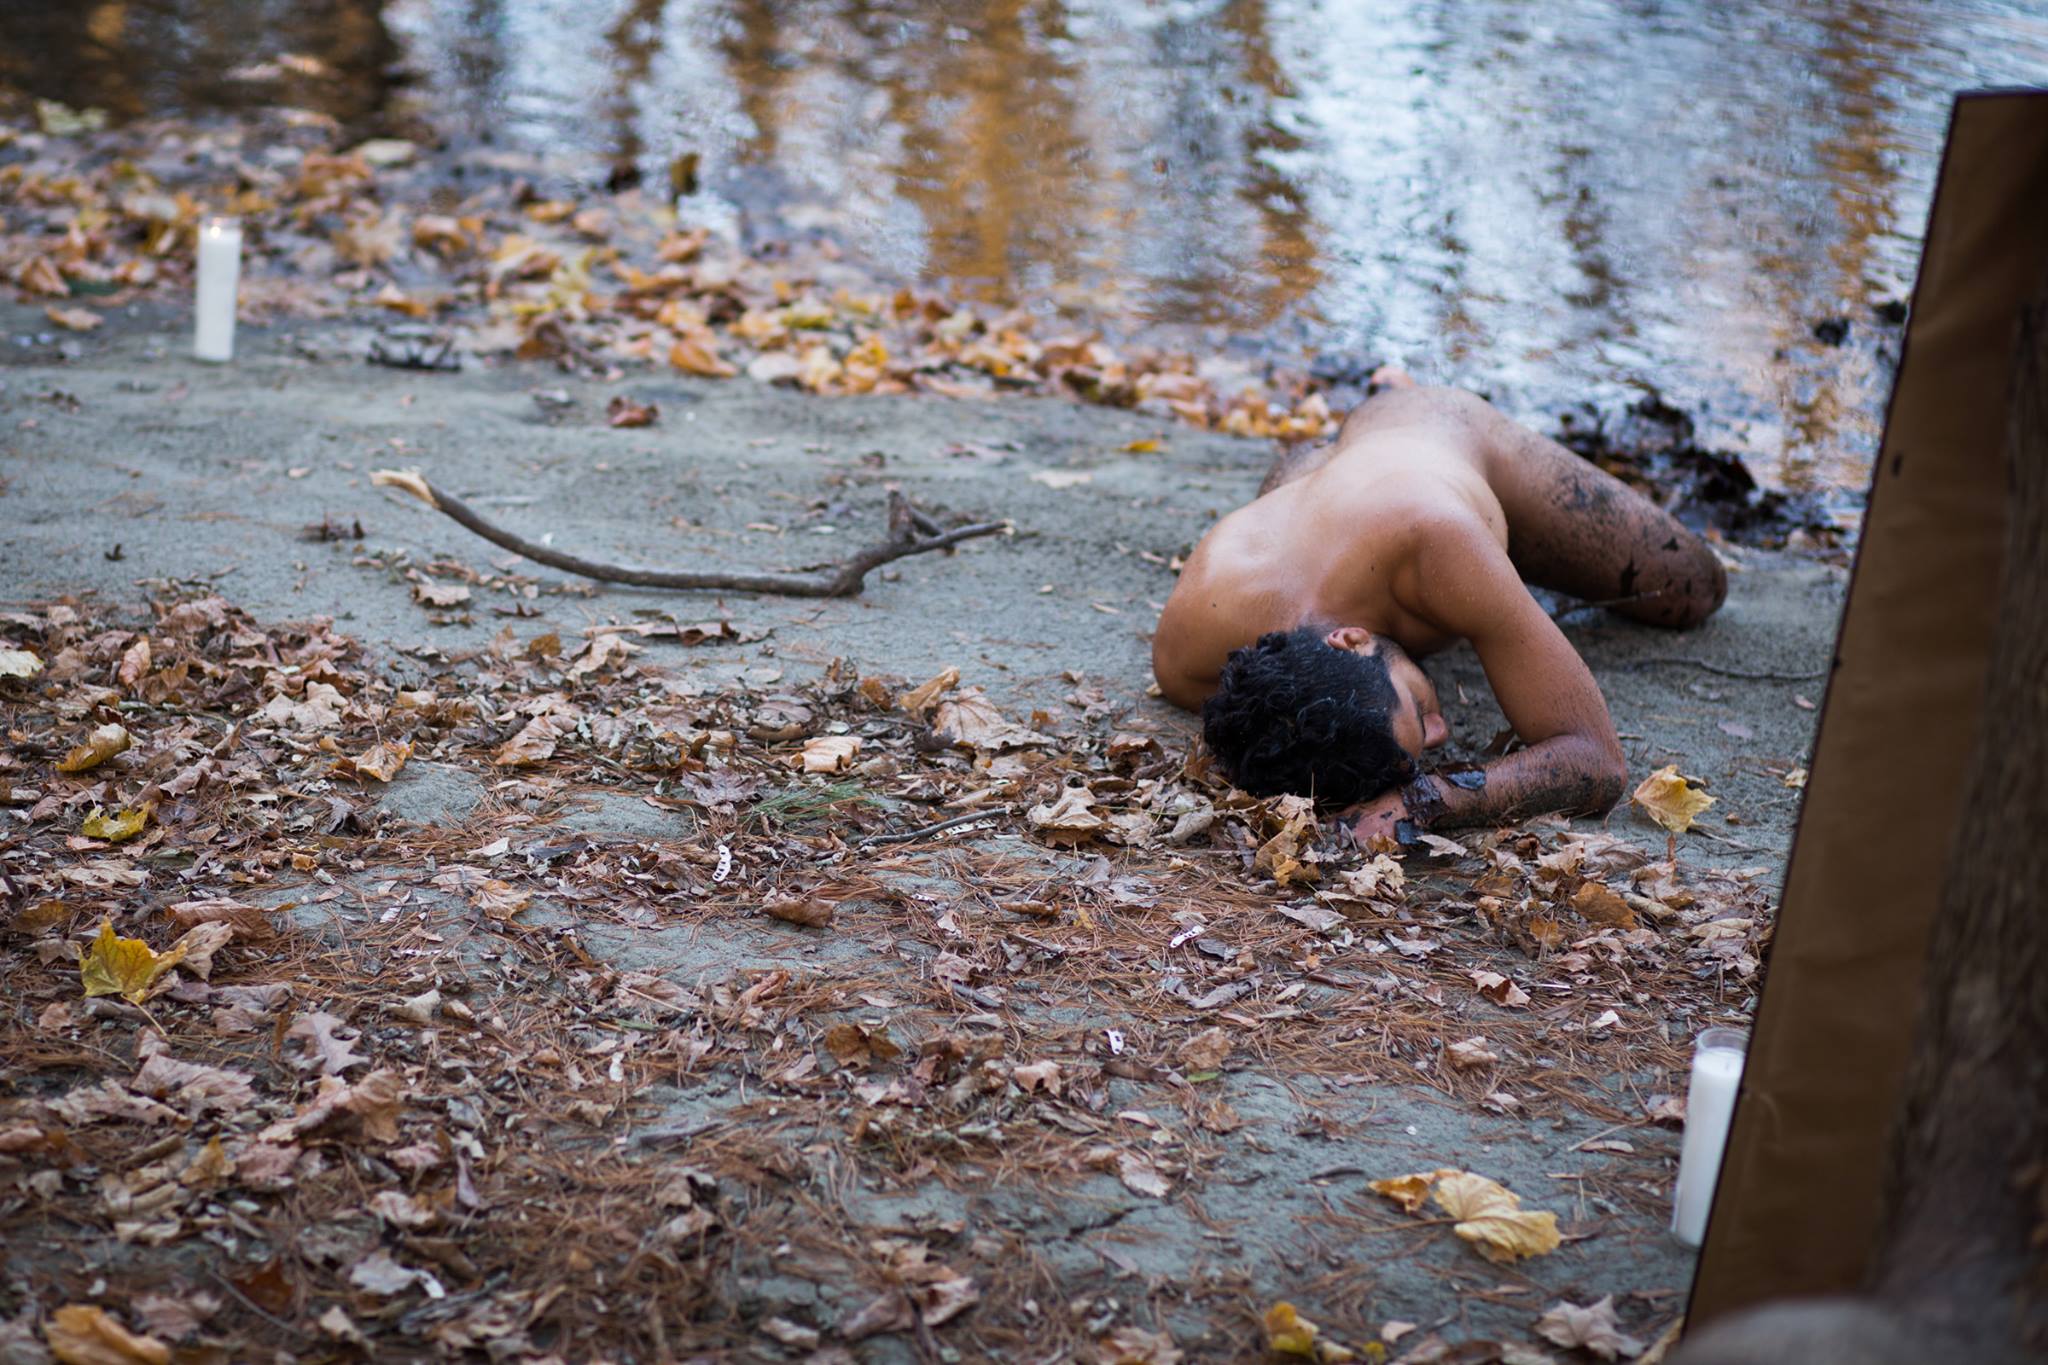 Estrellx is laying naked, face down, spiritually surrendering their body along a riverbank with their Brown body covered in debris